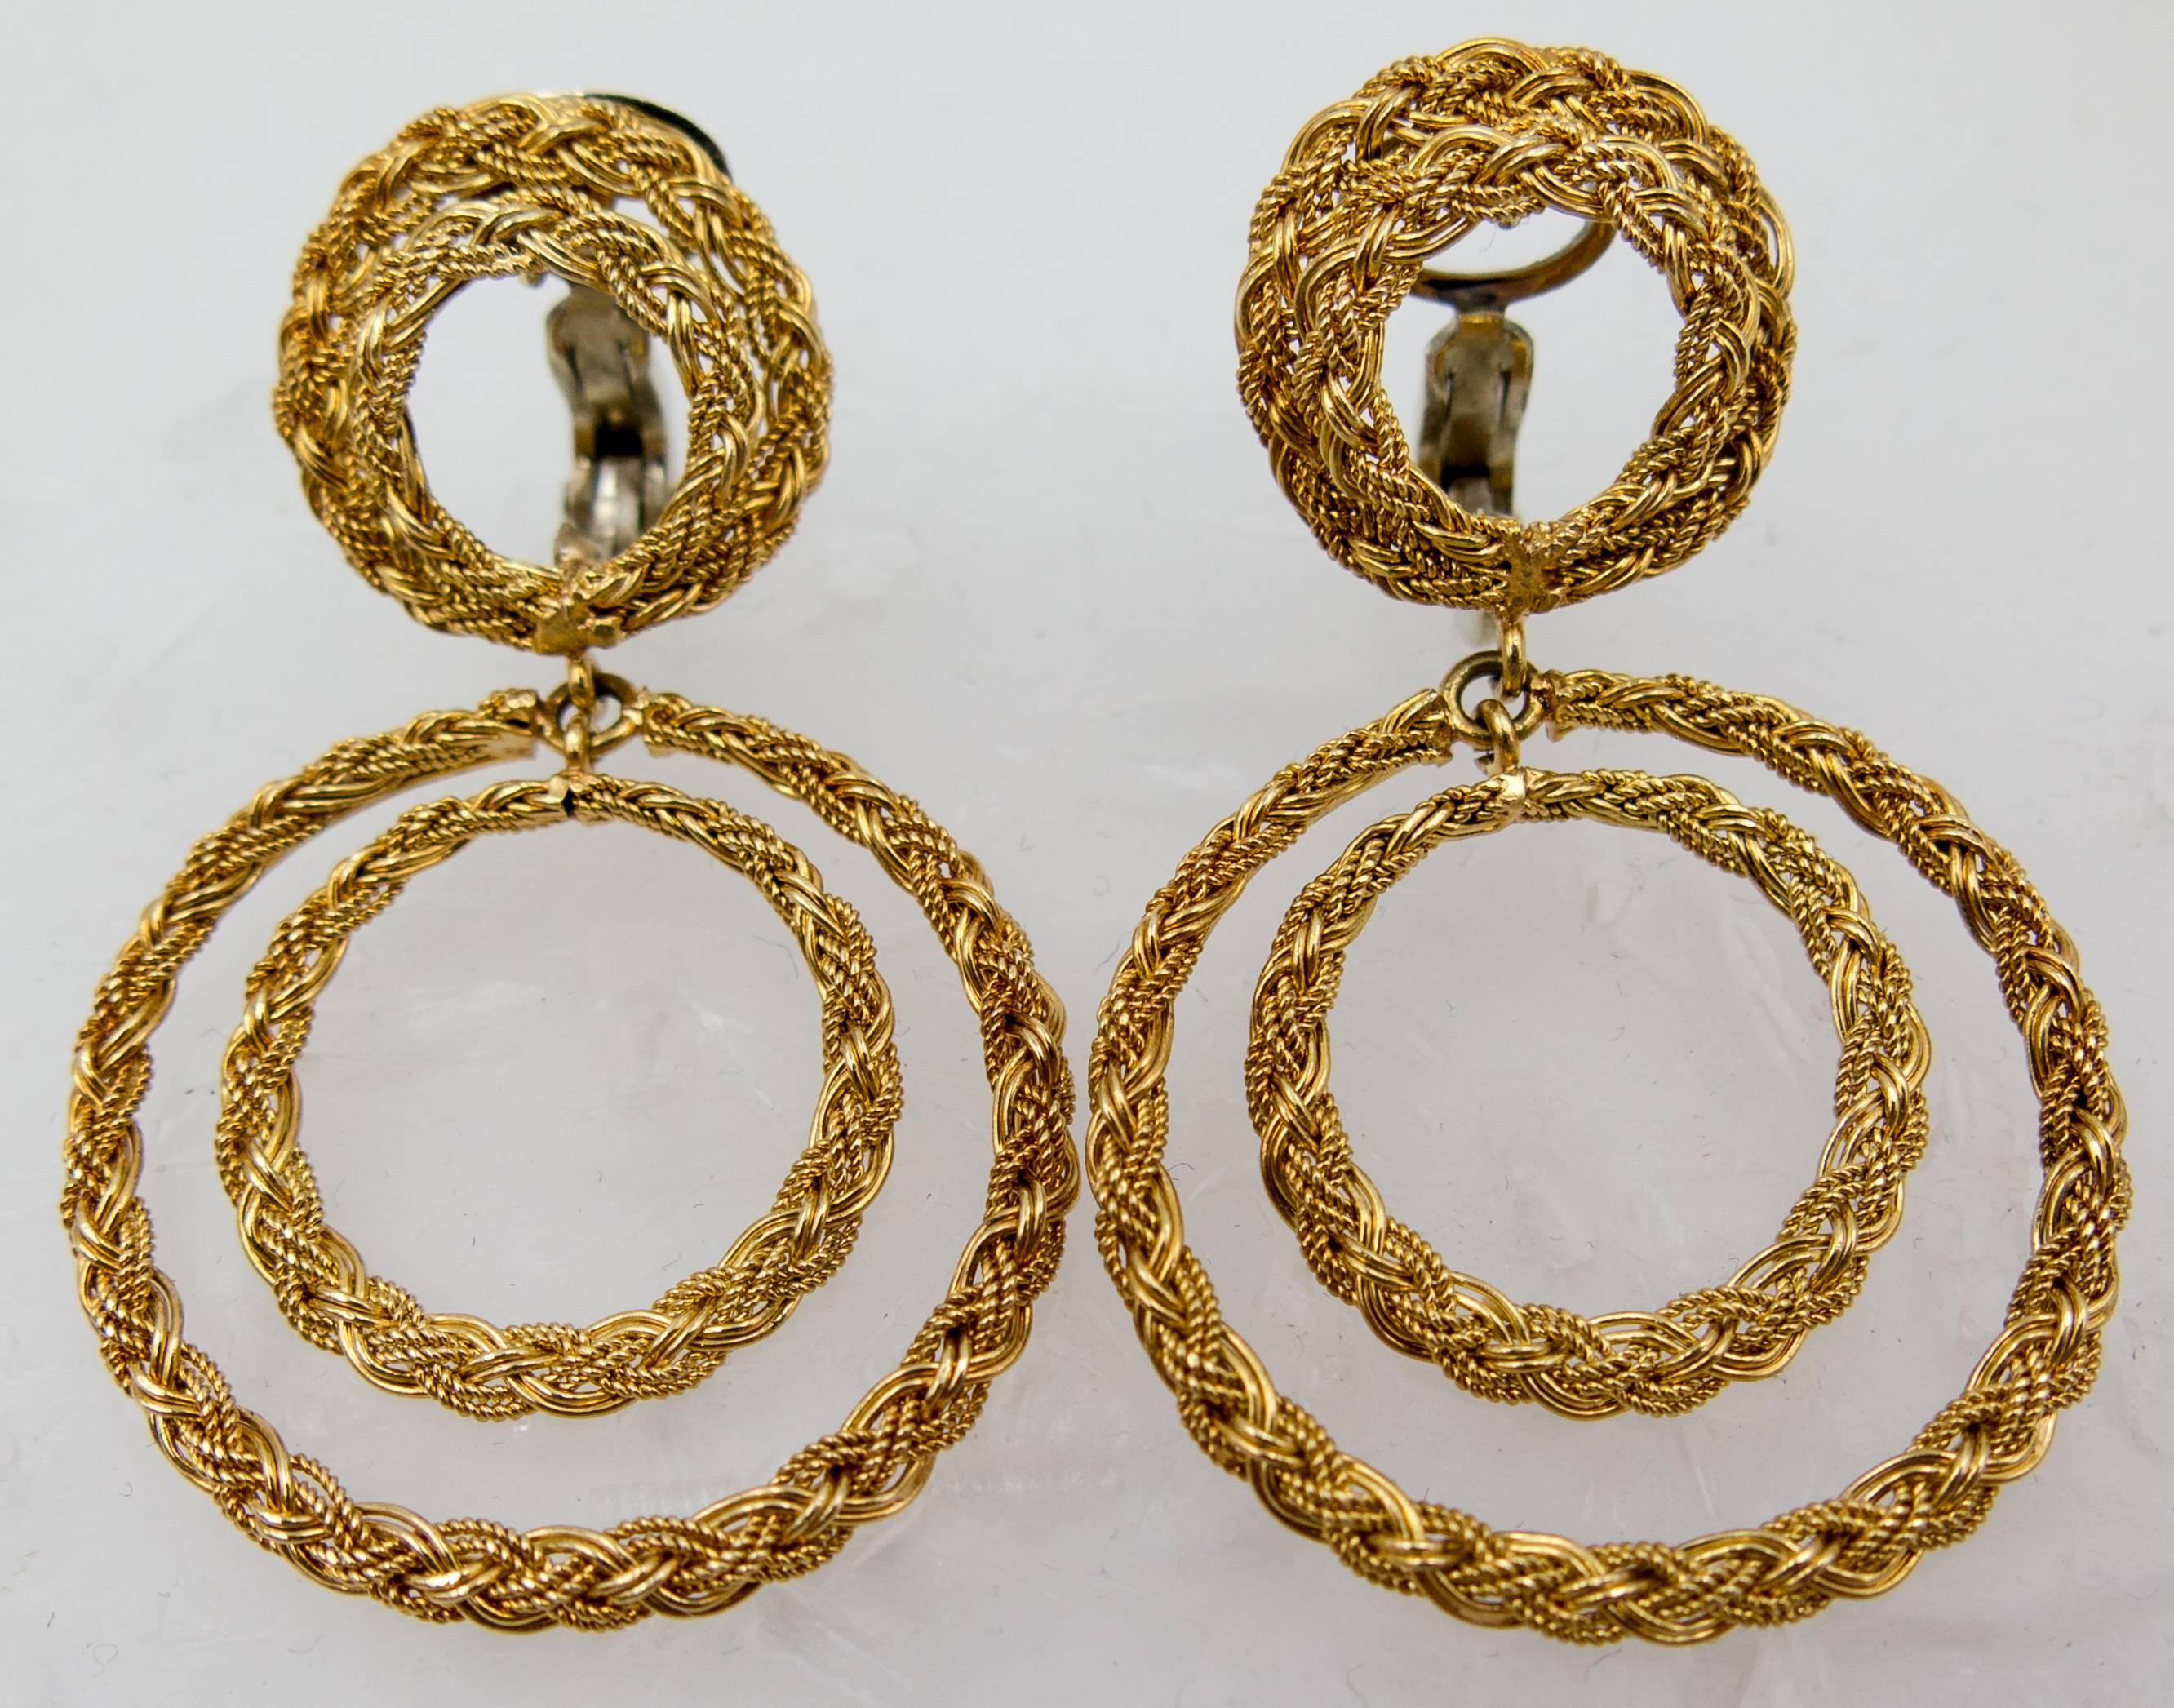 A beautiful and distinctive suite made of smooth and twisted 18 karat yellow gold wires bound together in large, open circles.   The earclips - made for the non pierced ear but can easily be adapted for a pierced ear if necessary - hang down 1 3/4